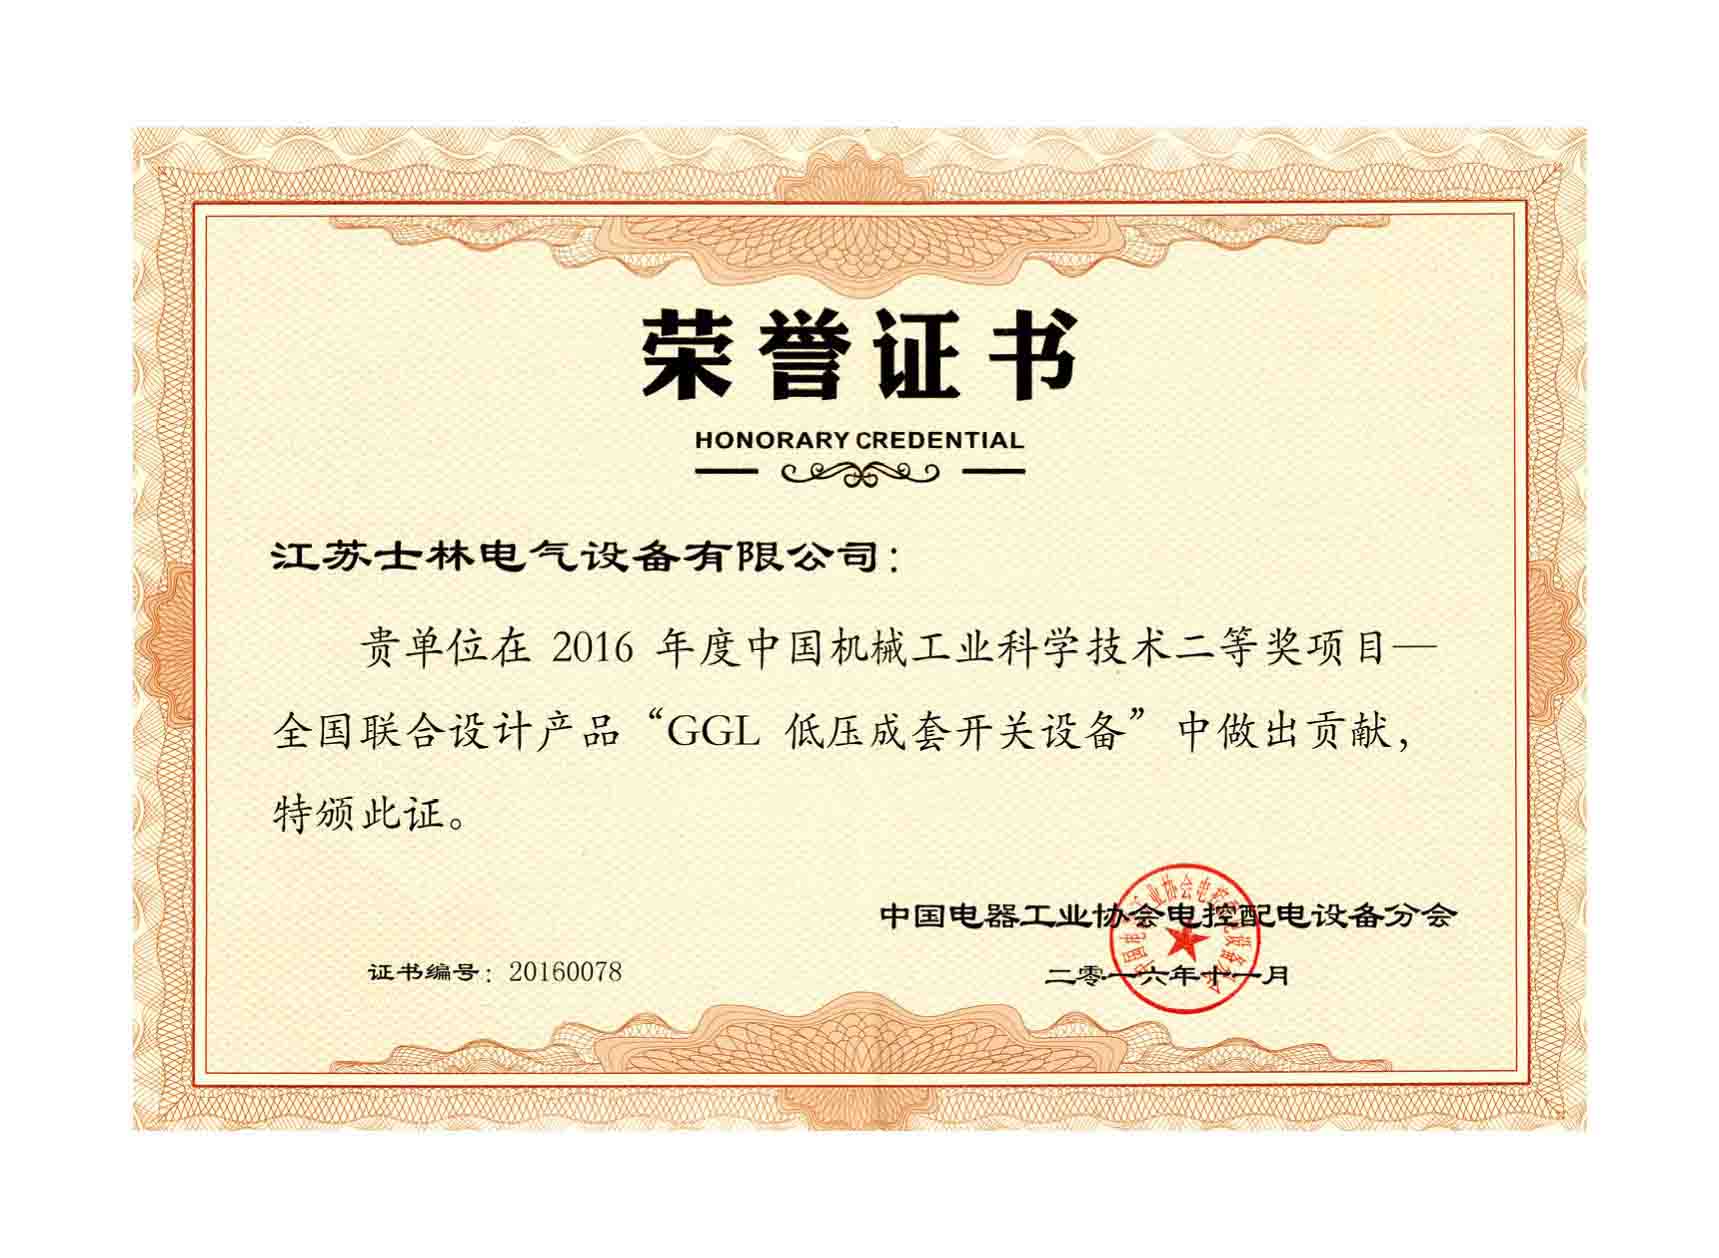 GGL joint design contribution certificate